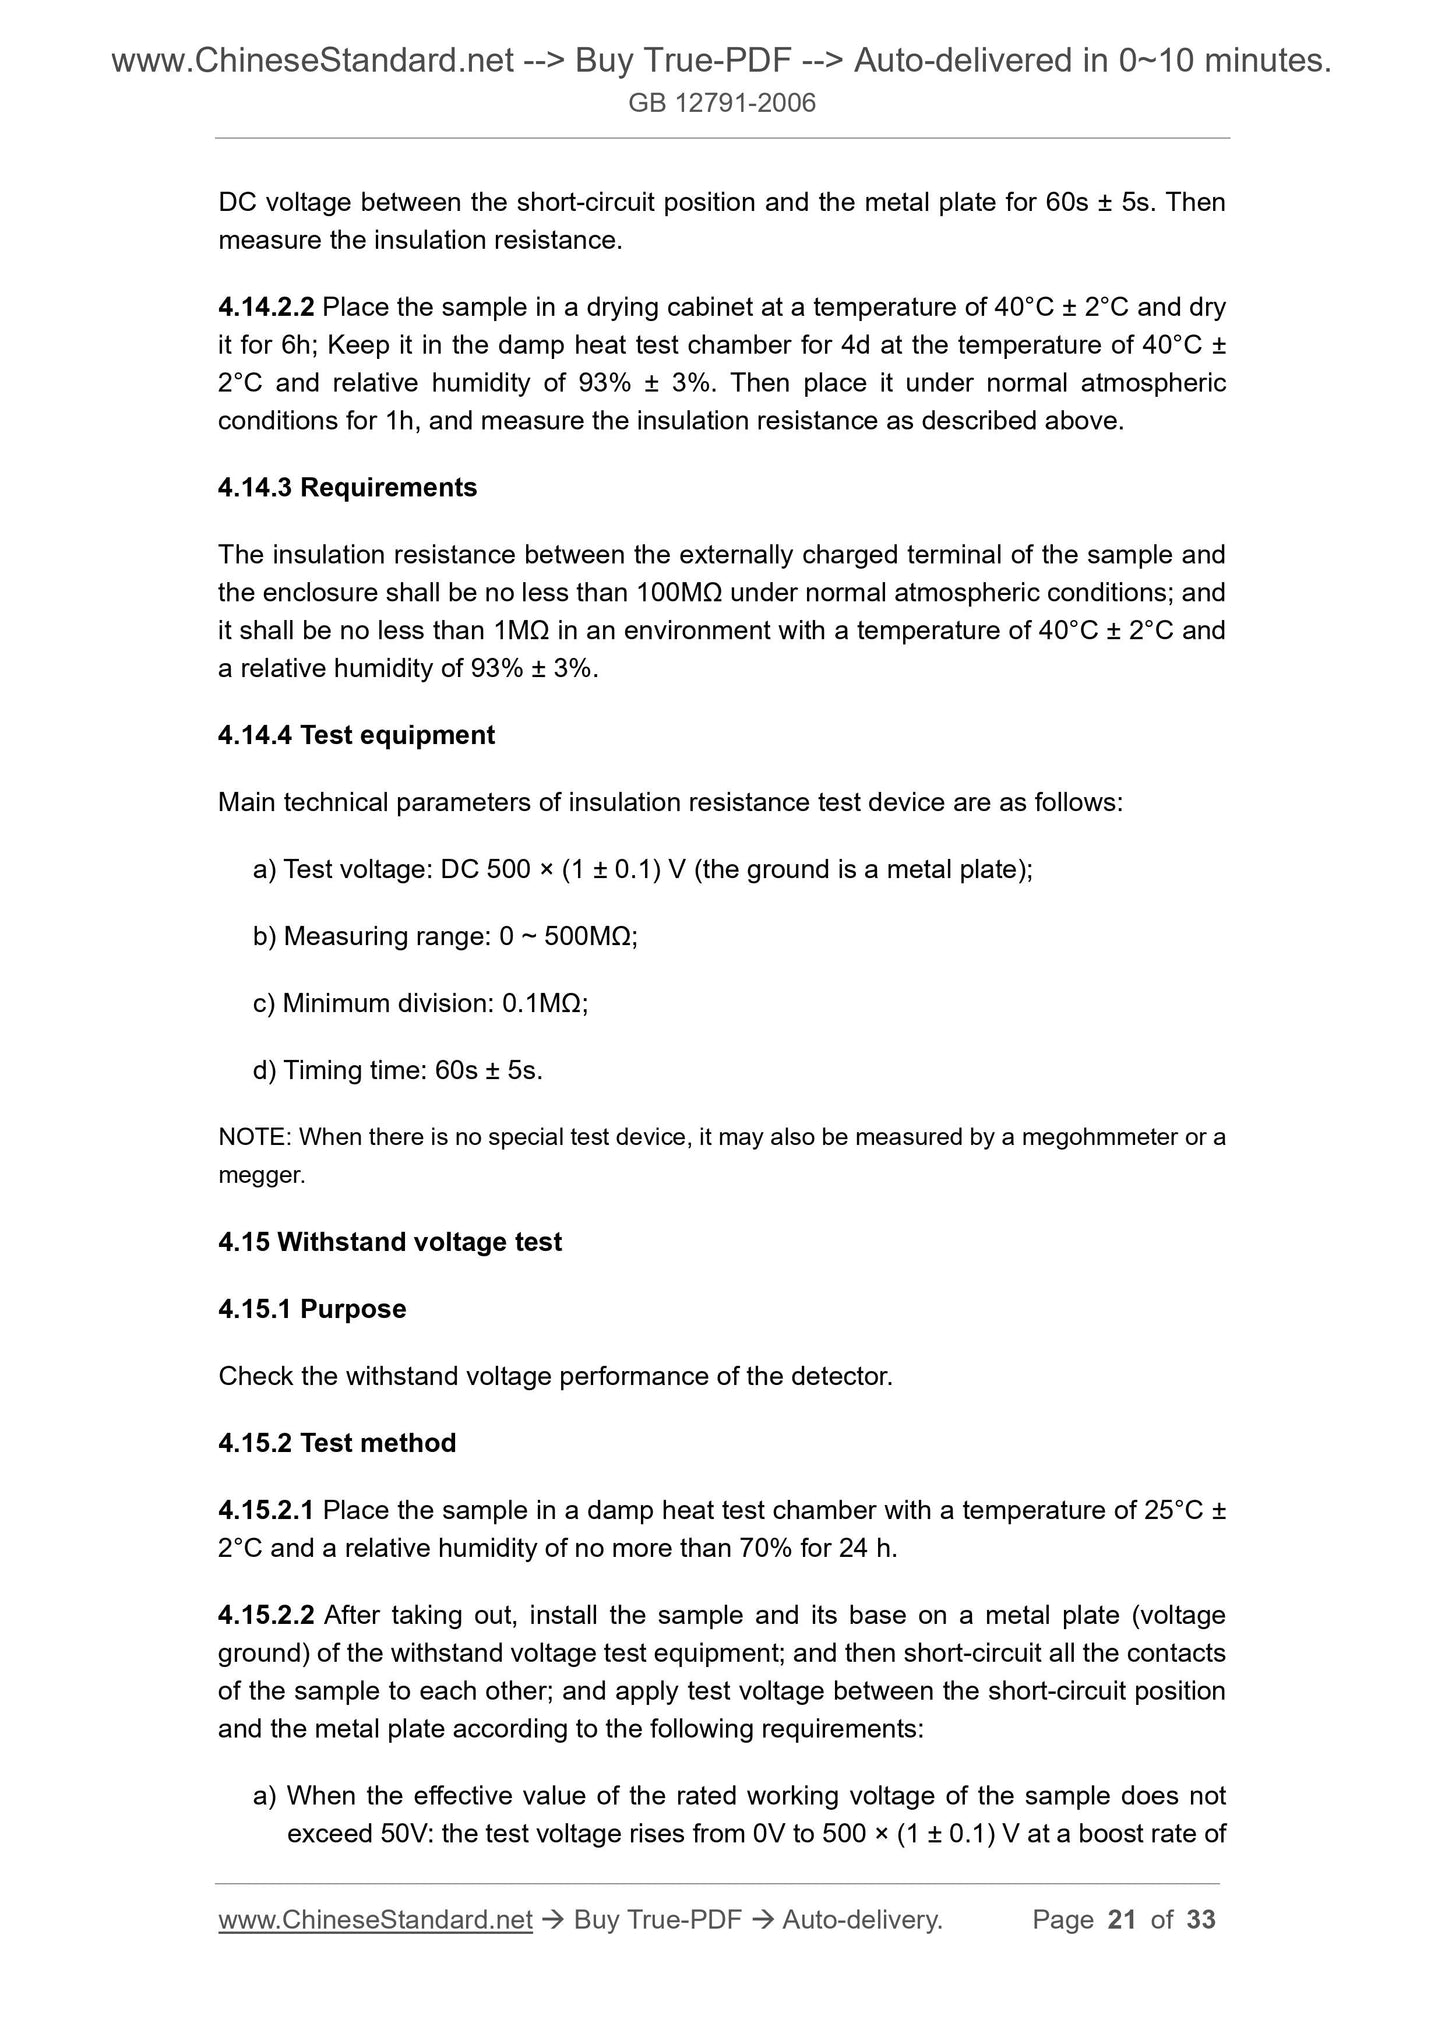 GB 12791-2006 Page 11